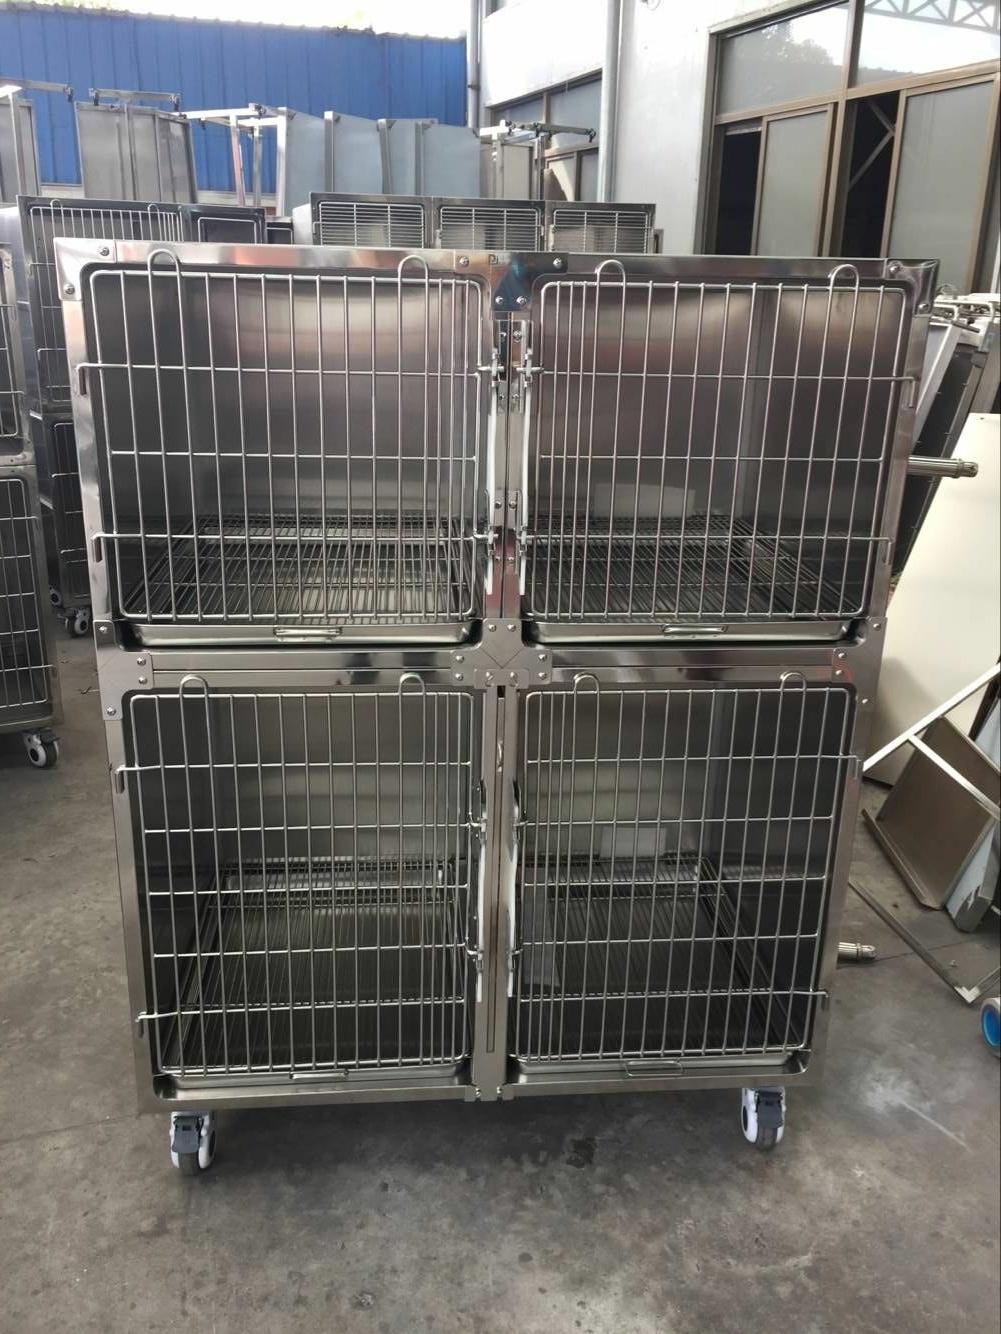 Veterinary Stainless Steel Dog Kennel Cages Vet Equipment Animal ICU Cages for Sale